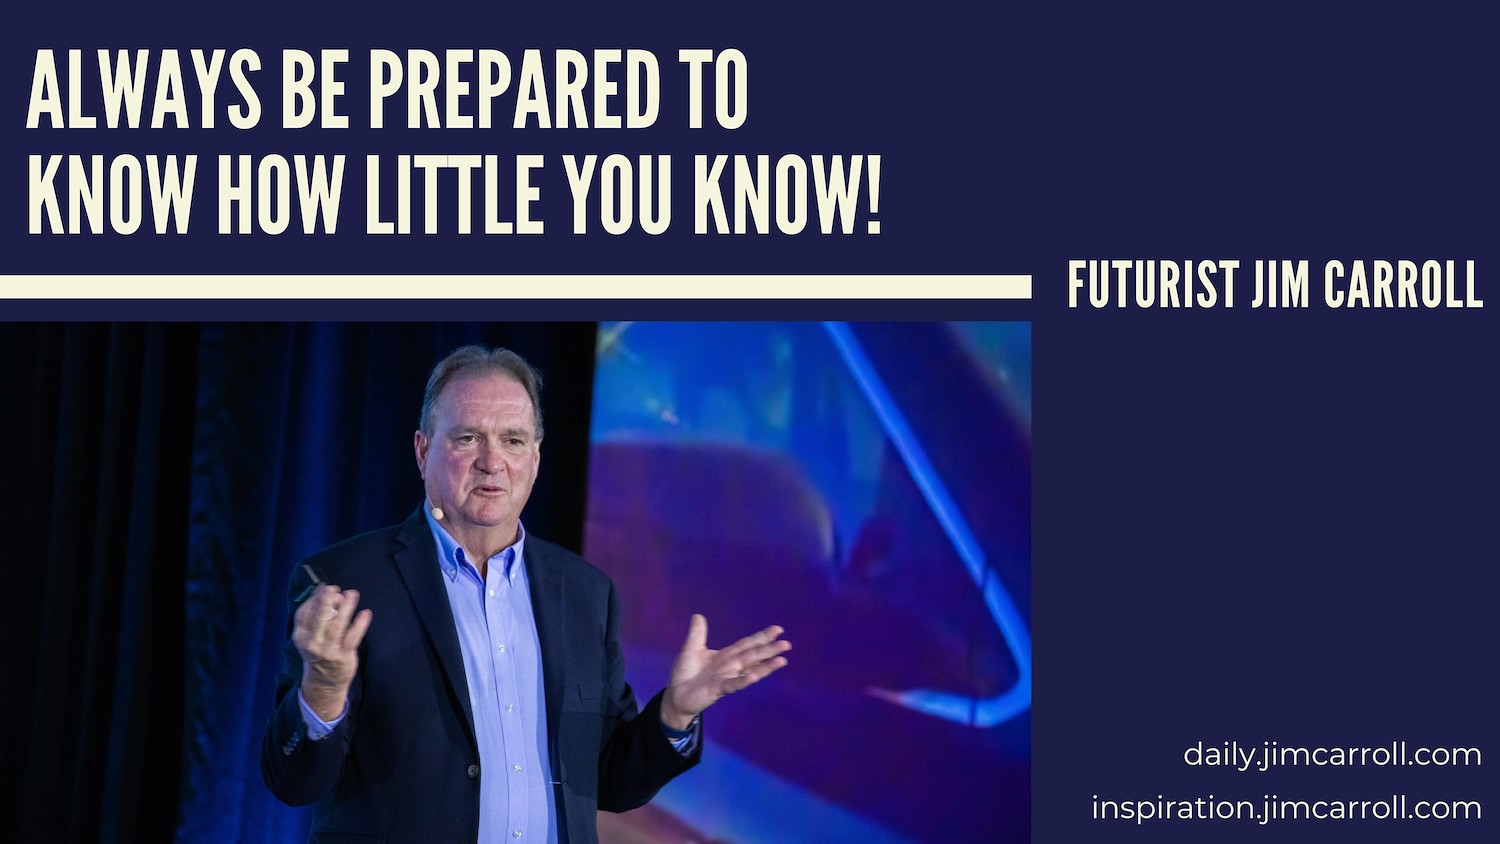 Daily Inspiration: "Always be prepared to know how little you know!" - Futurist Jim Carroll